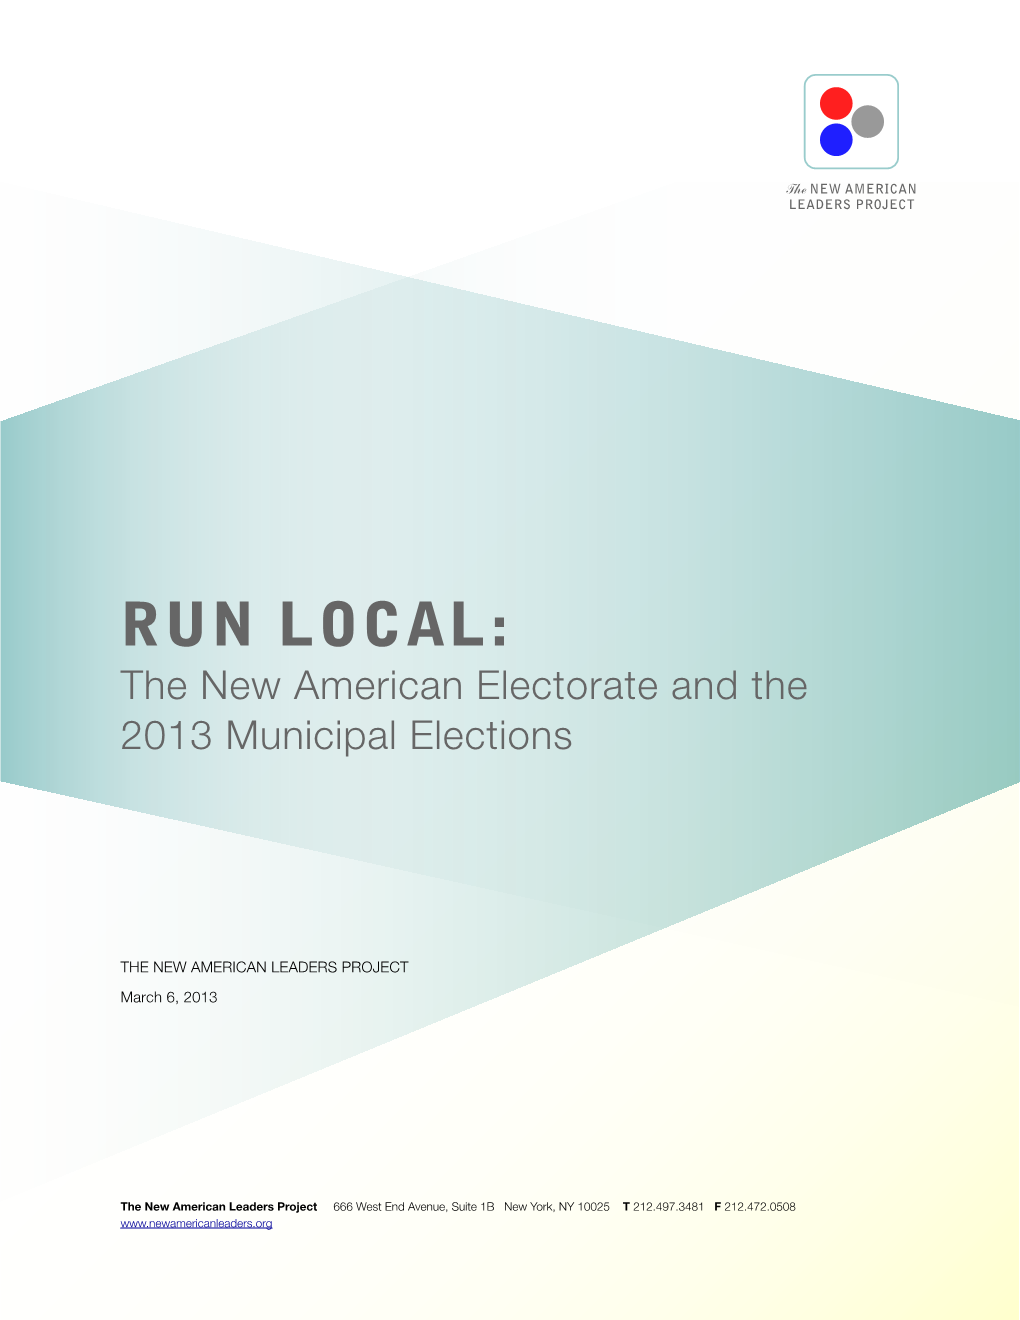 Run Local: the New American Electorate and the 2013 Municipal Elections 1 Message from the Founding Director